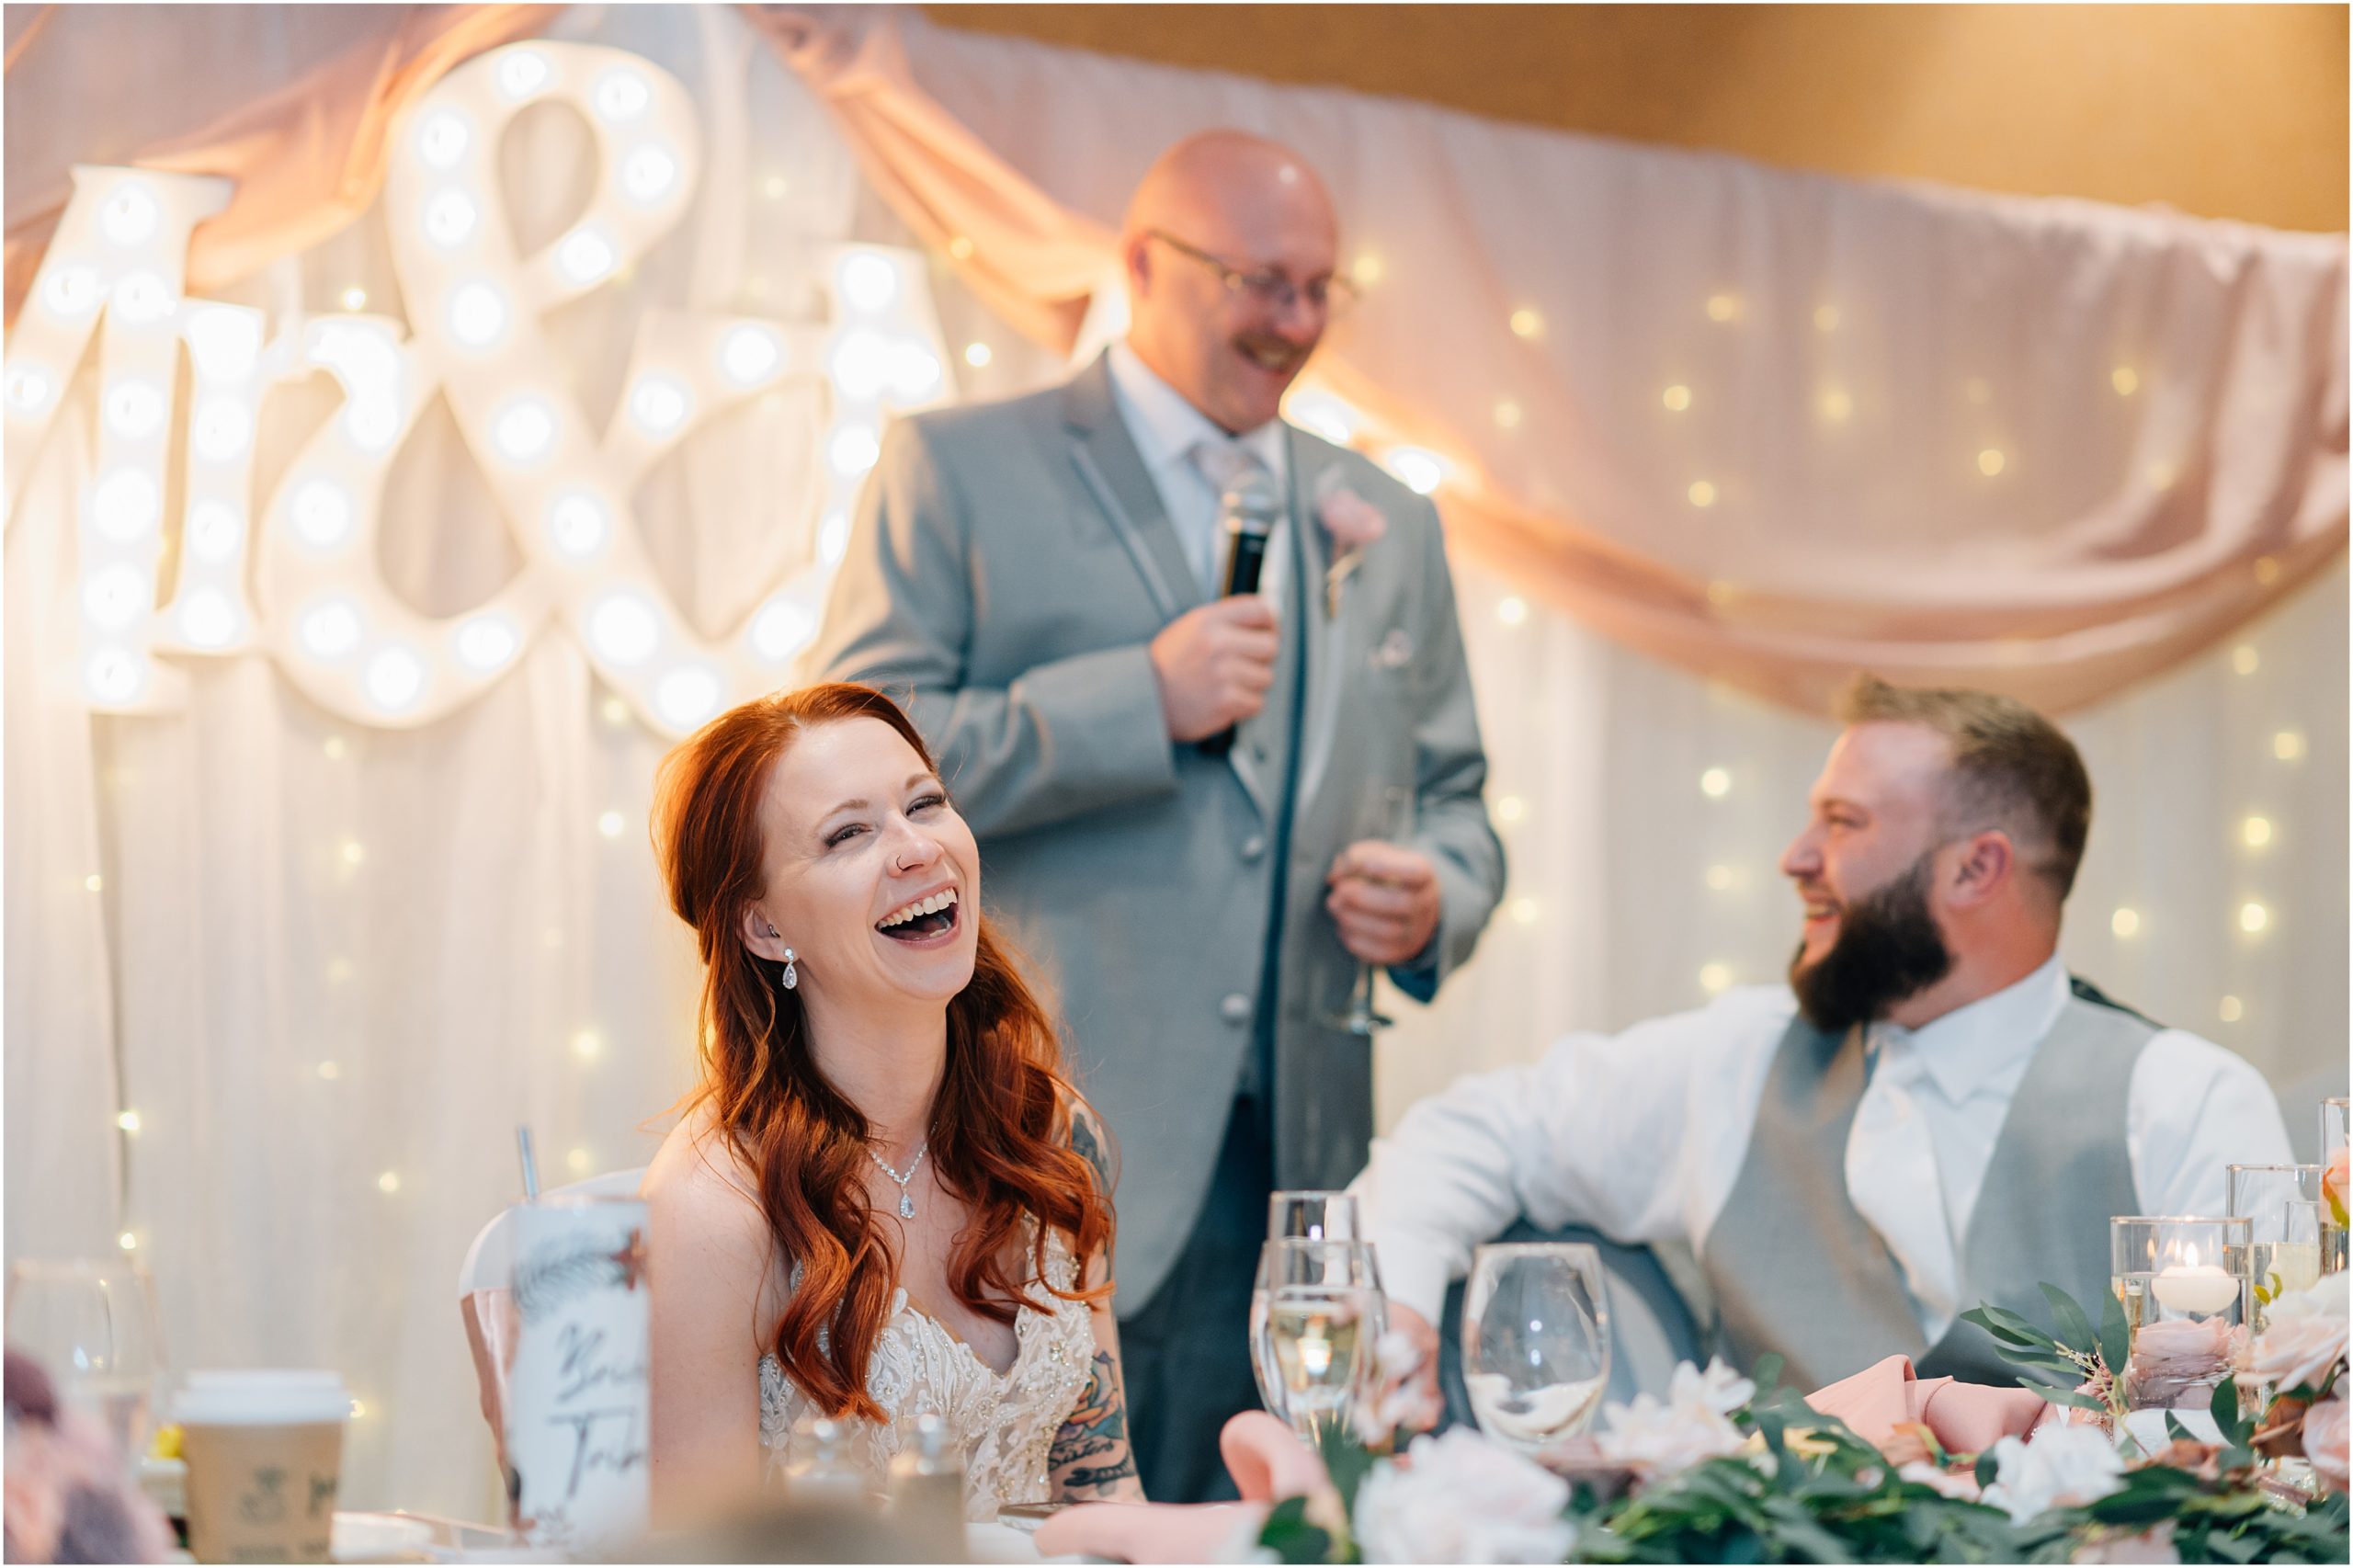 Bride laughs while her dad makes a joke during the wedding speeches at Honey Creek Resort in Iowa. By Anna Brace who specializes in Omaha Nebraska wedding photography